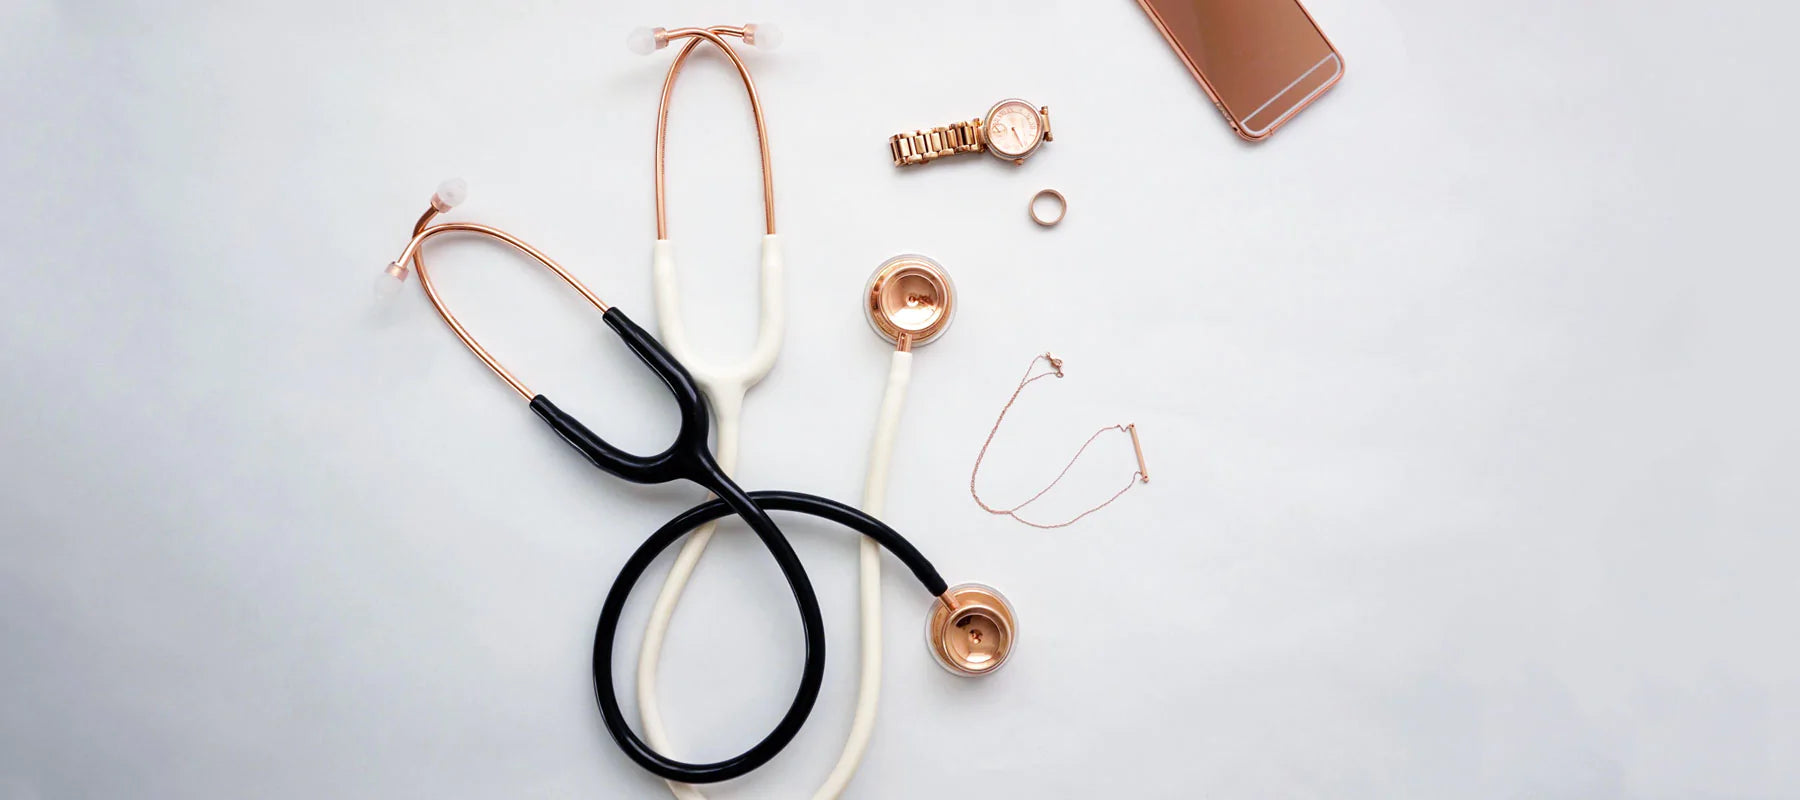 MDF ProCardial Cardiology Stethoscope - Snow Leopard/Rose Gold